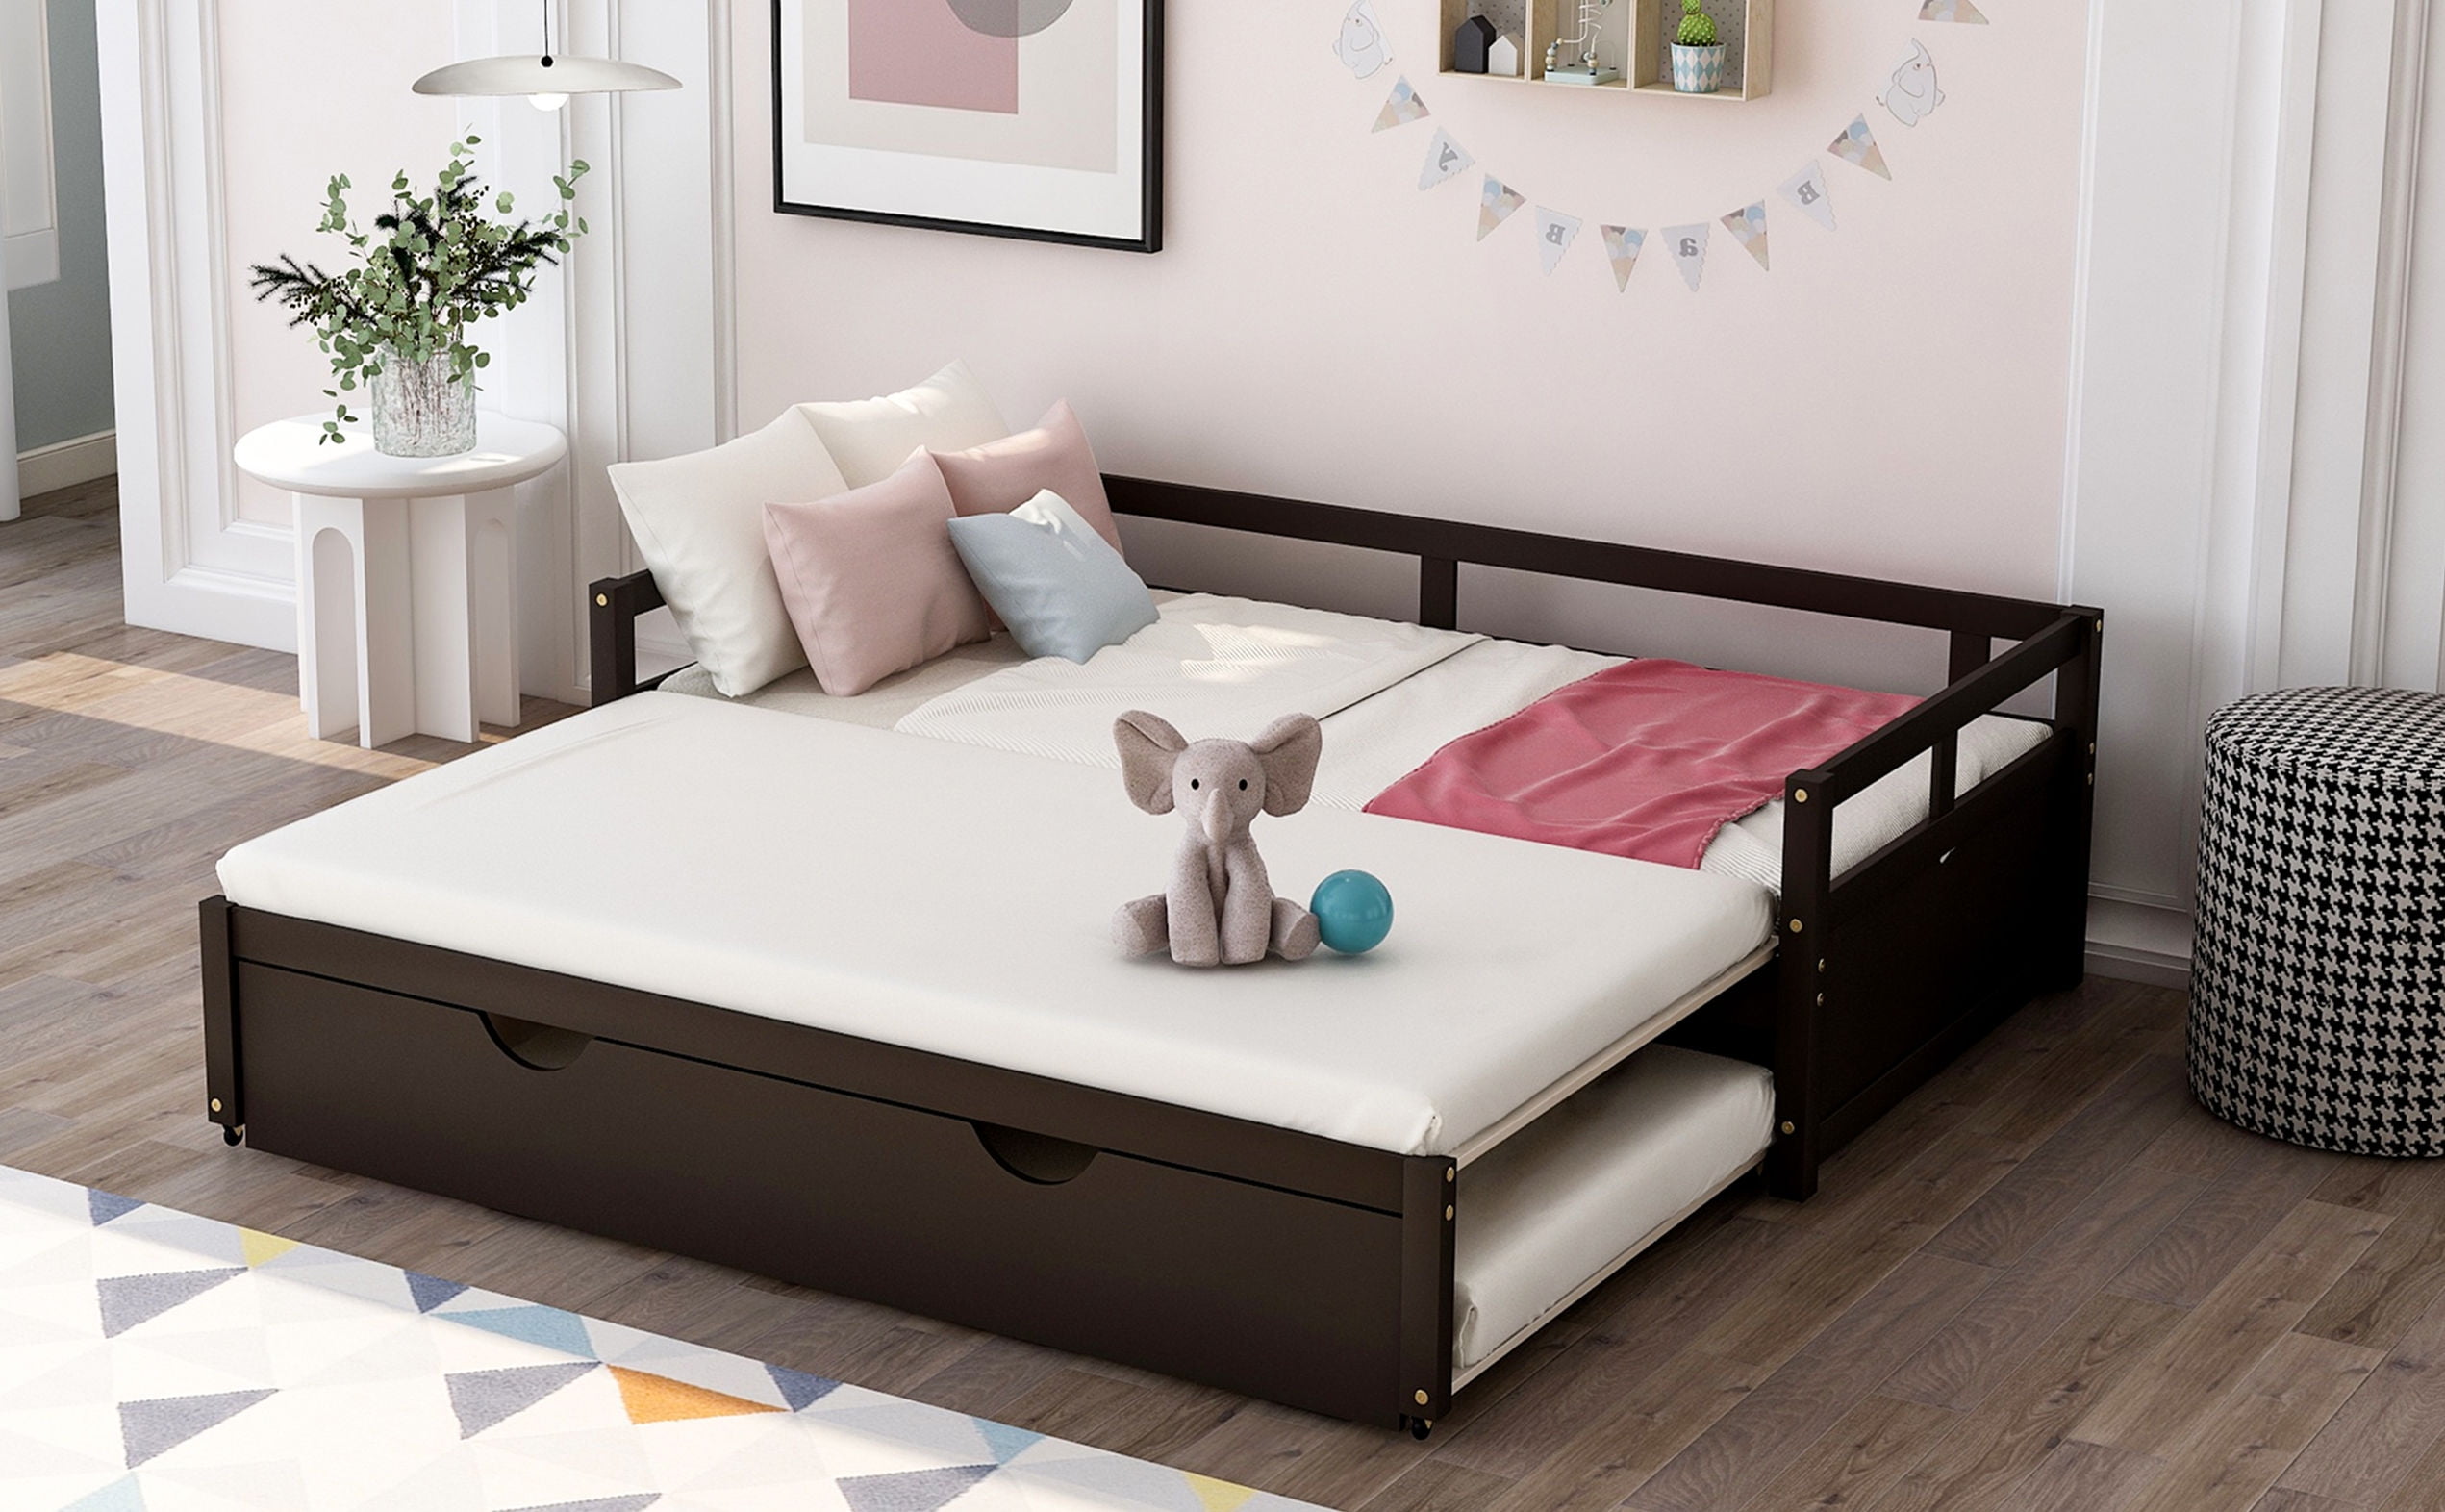 sofa with a trundle bed